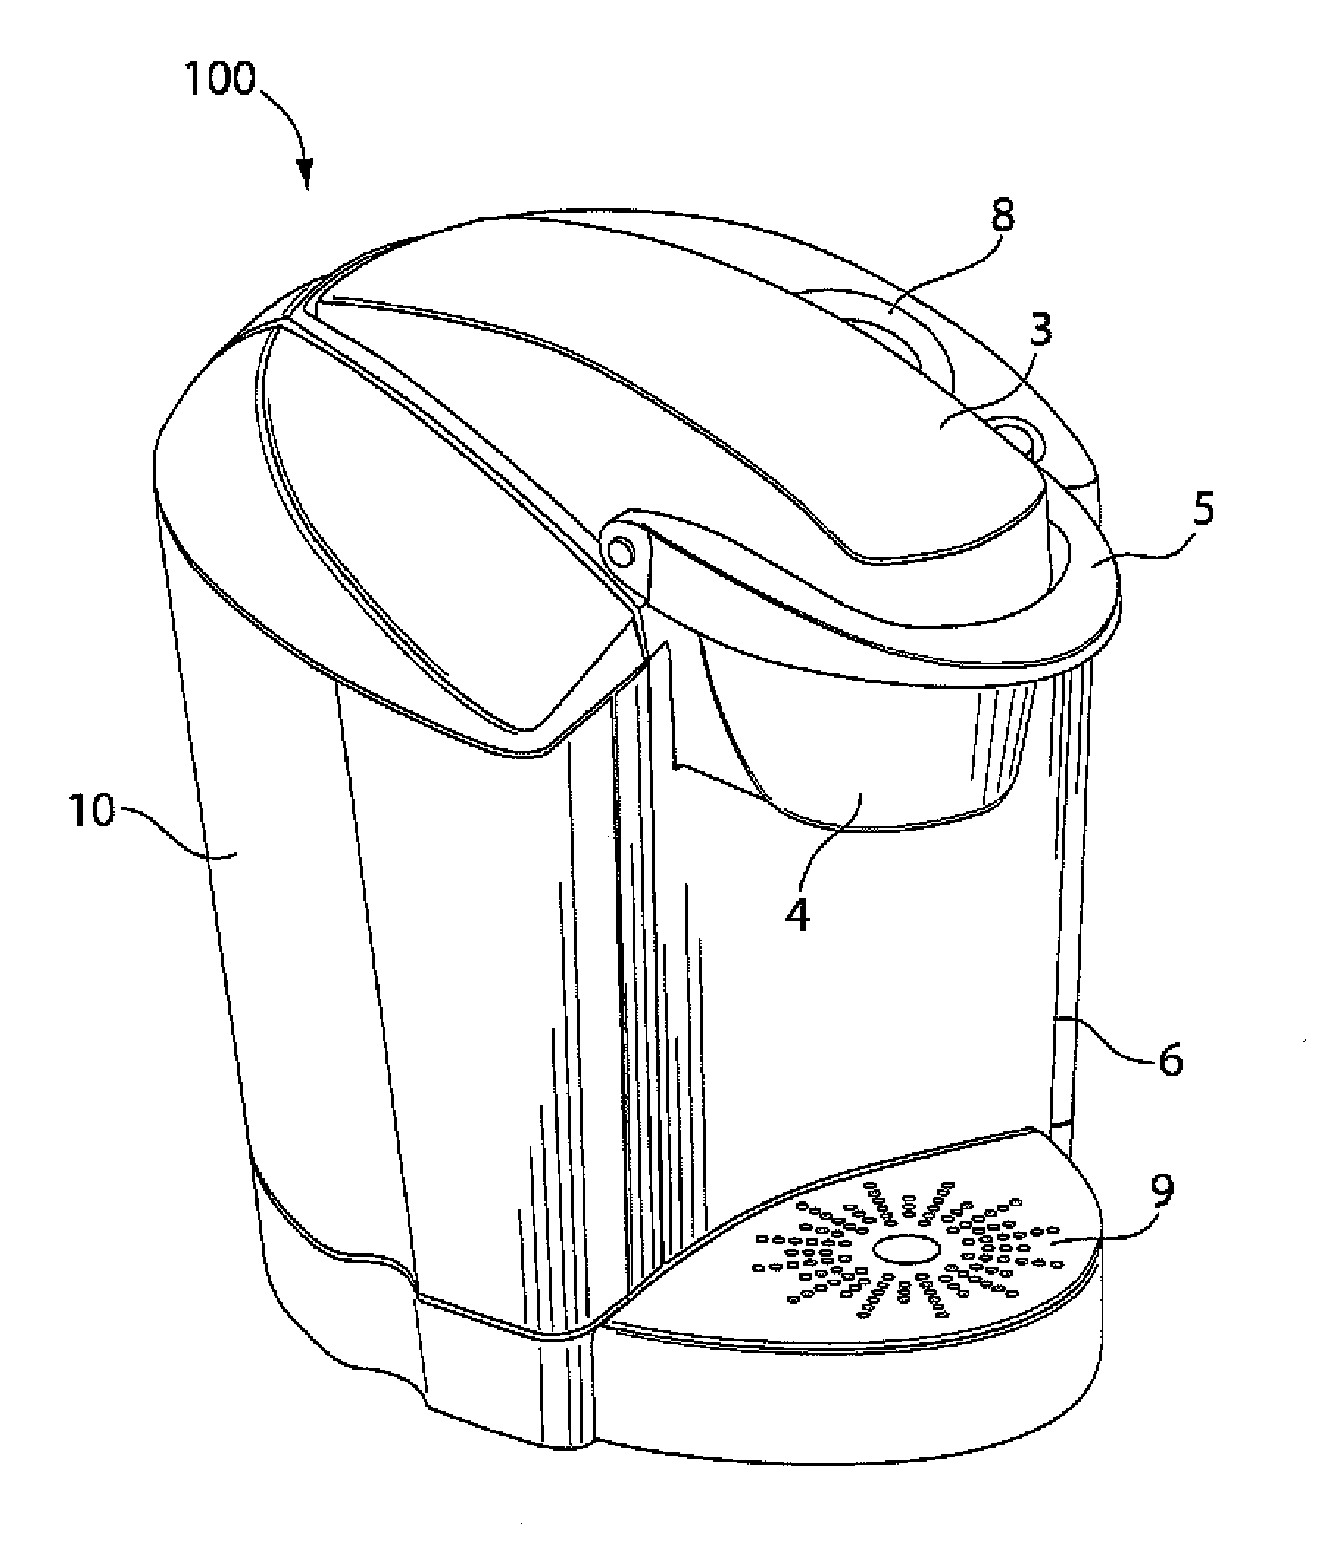 Beverage forming apparatus with centrifugal pump